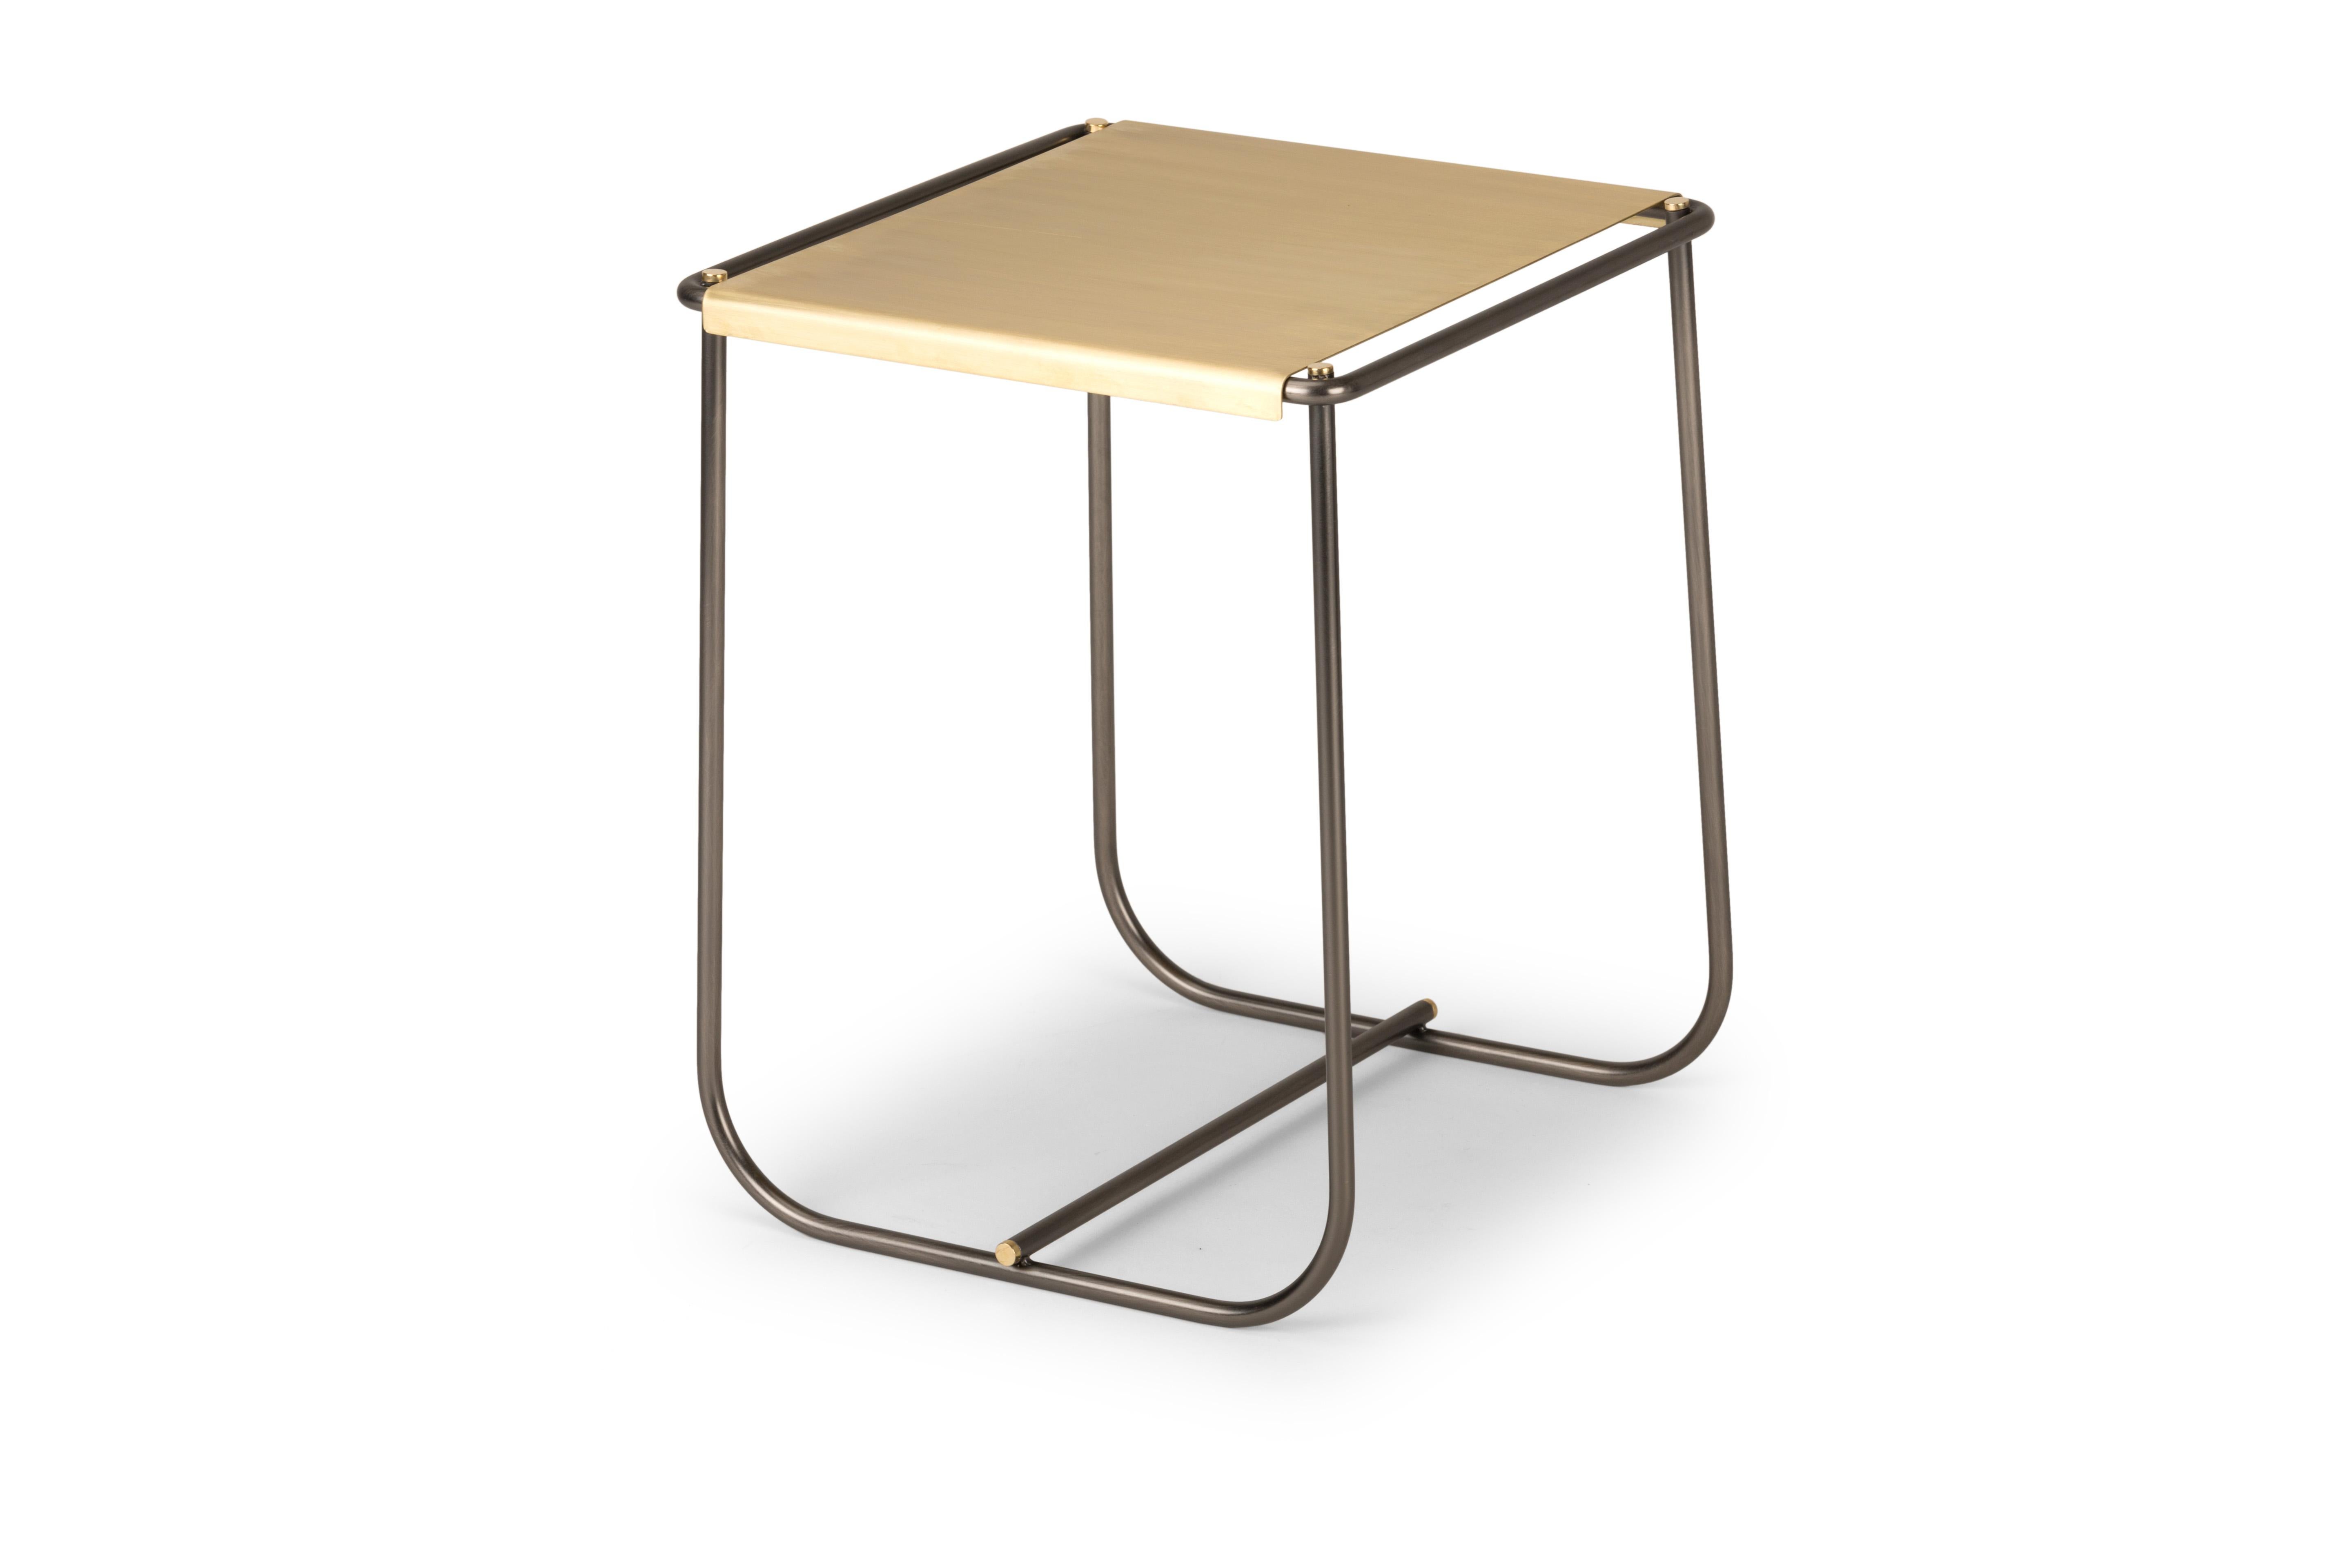 Stam stool by Mingardo
Dimensions: D 37 x W 36.5 x H 46.5 cm 
Materials: Bent metal tube structure and natural brass seat
Weight: 12 kg
Also available in different finishes. 

A bent metal tube surrounds the seat made in natural brass. Brass